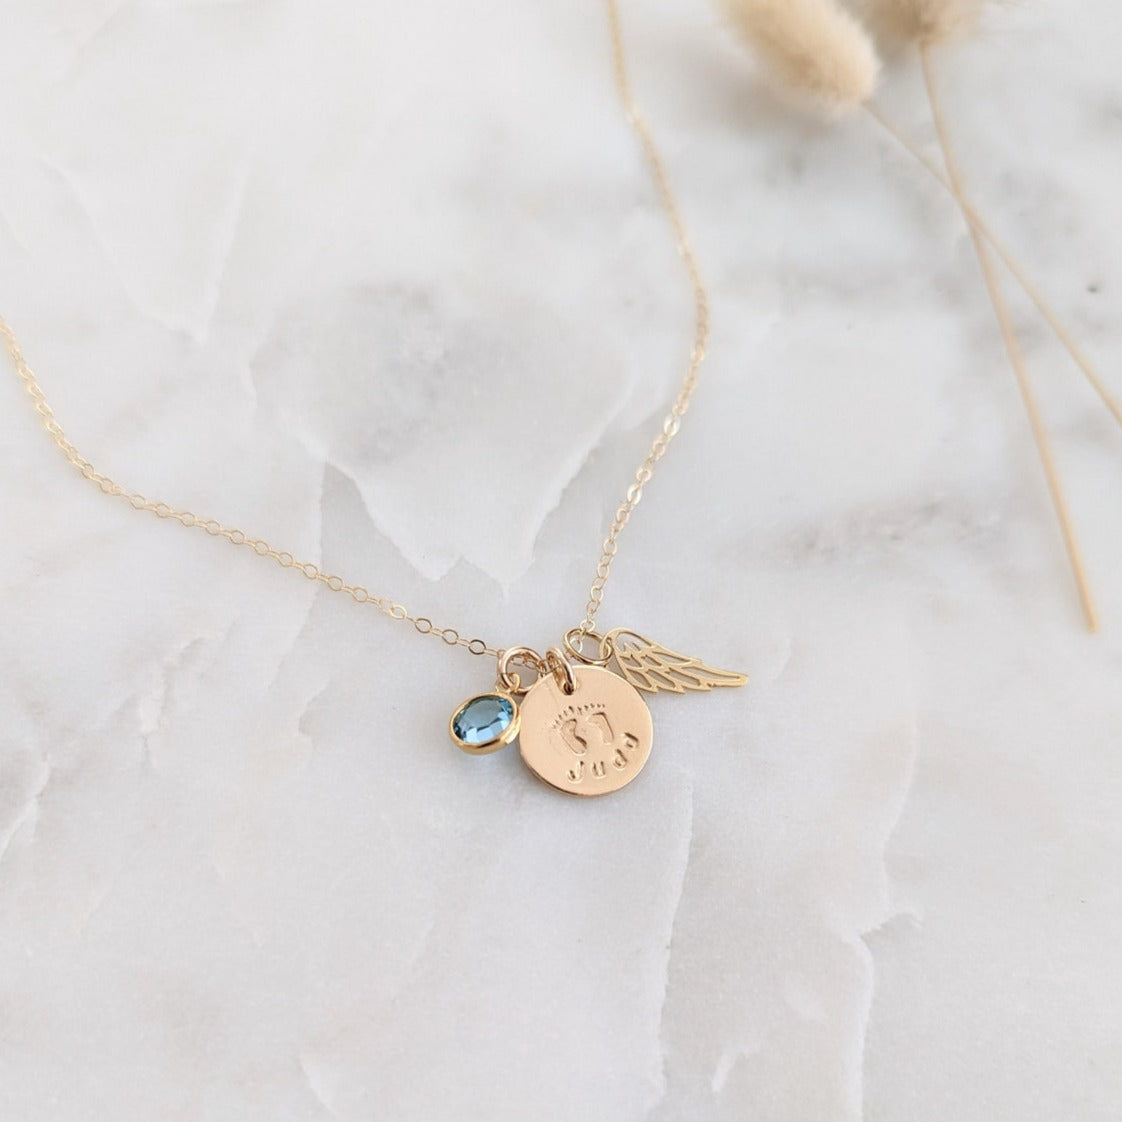 personalized miscarriage necklace with name, wing charm and birthstone